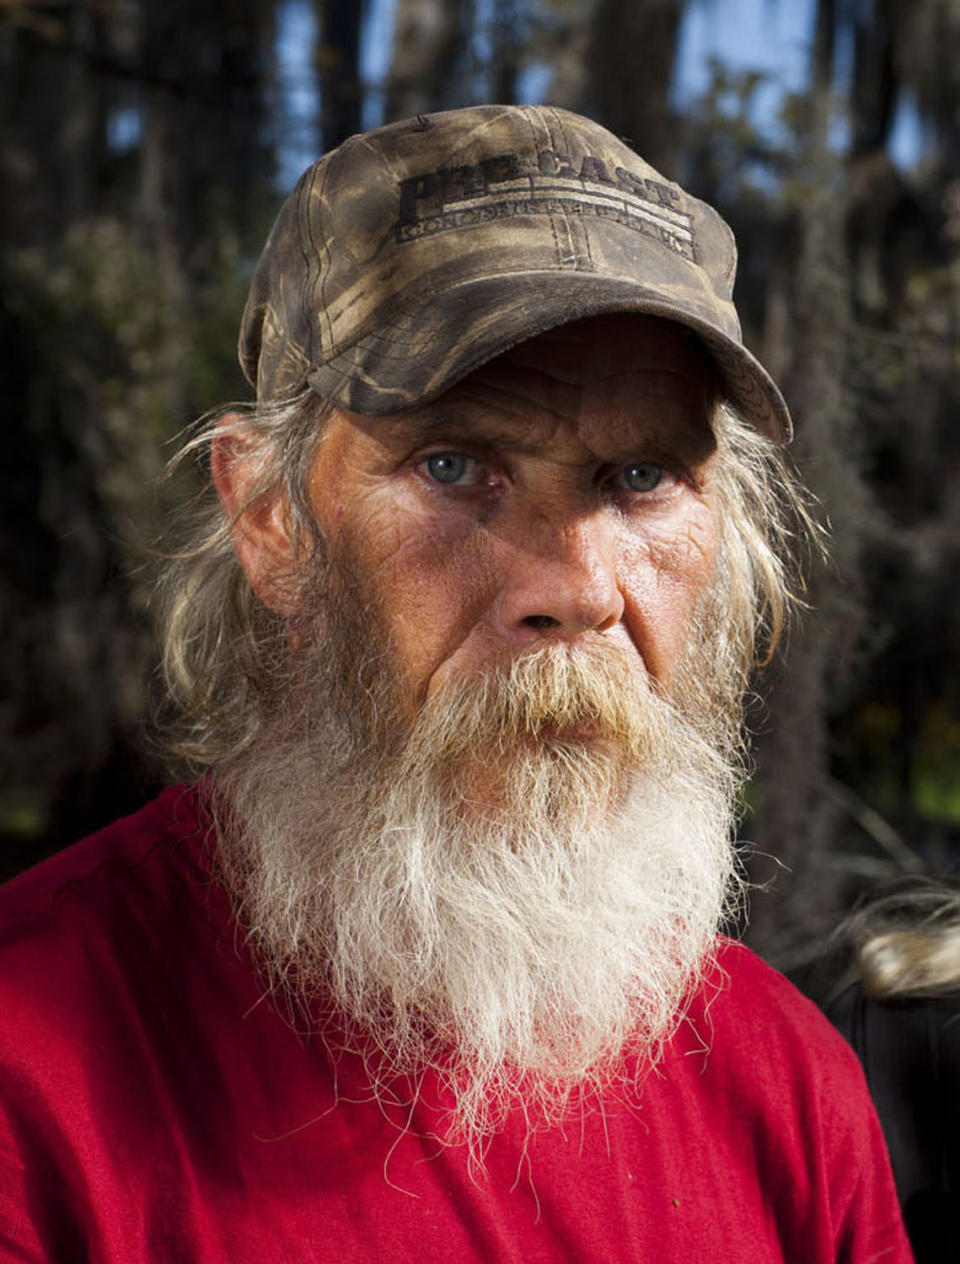 Mitchell Guist, who appeared in segments of the "Swamp People" with his brother, Glenn, <a href="http://www.huffingtonpost.com/2012/05/14/mitchell-guist-dead-swamp-people_n_1515423.html">died after collapsing Monday, May 14, 2012</a> while working on a houseboat he was building on Belle River.